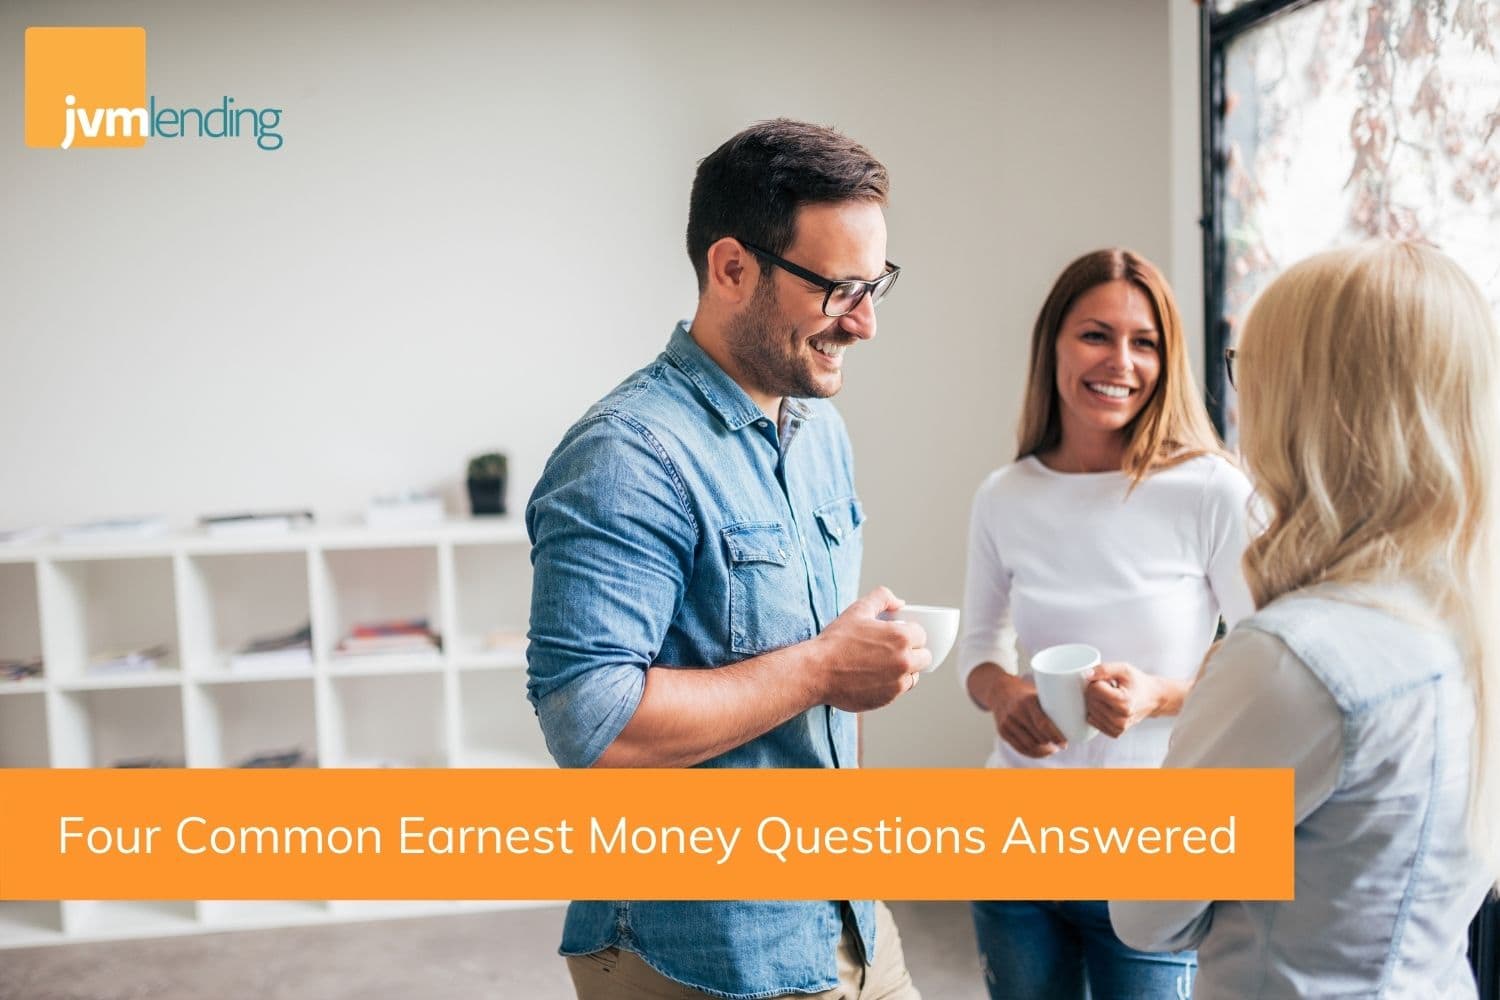 three business professionals stand in a bright room and discuss four common earnest money questions